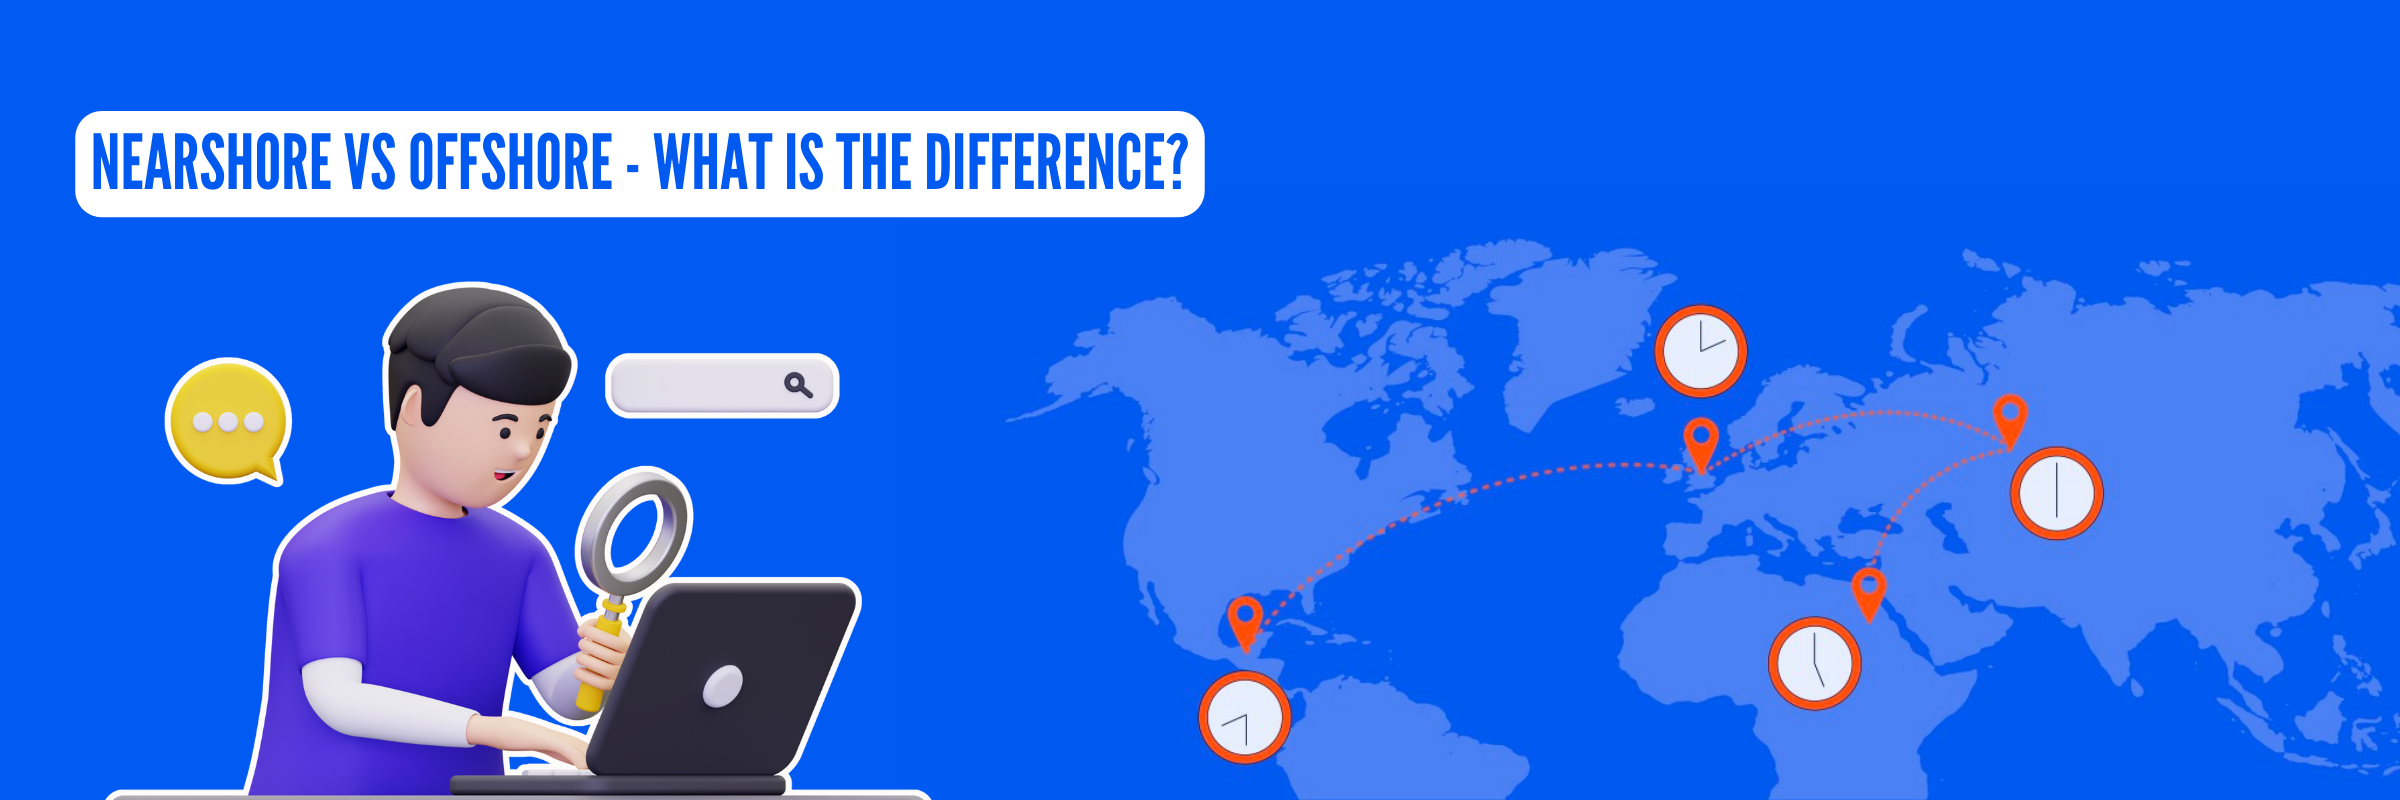 Nearshore Vs Offshore: What is the difference?